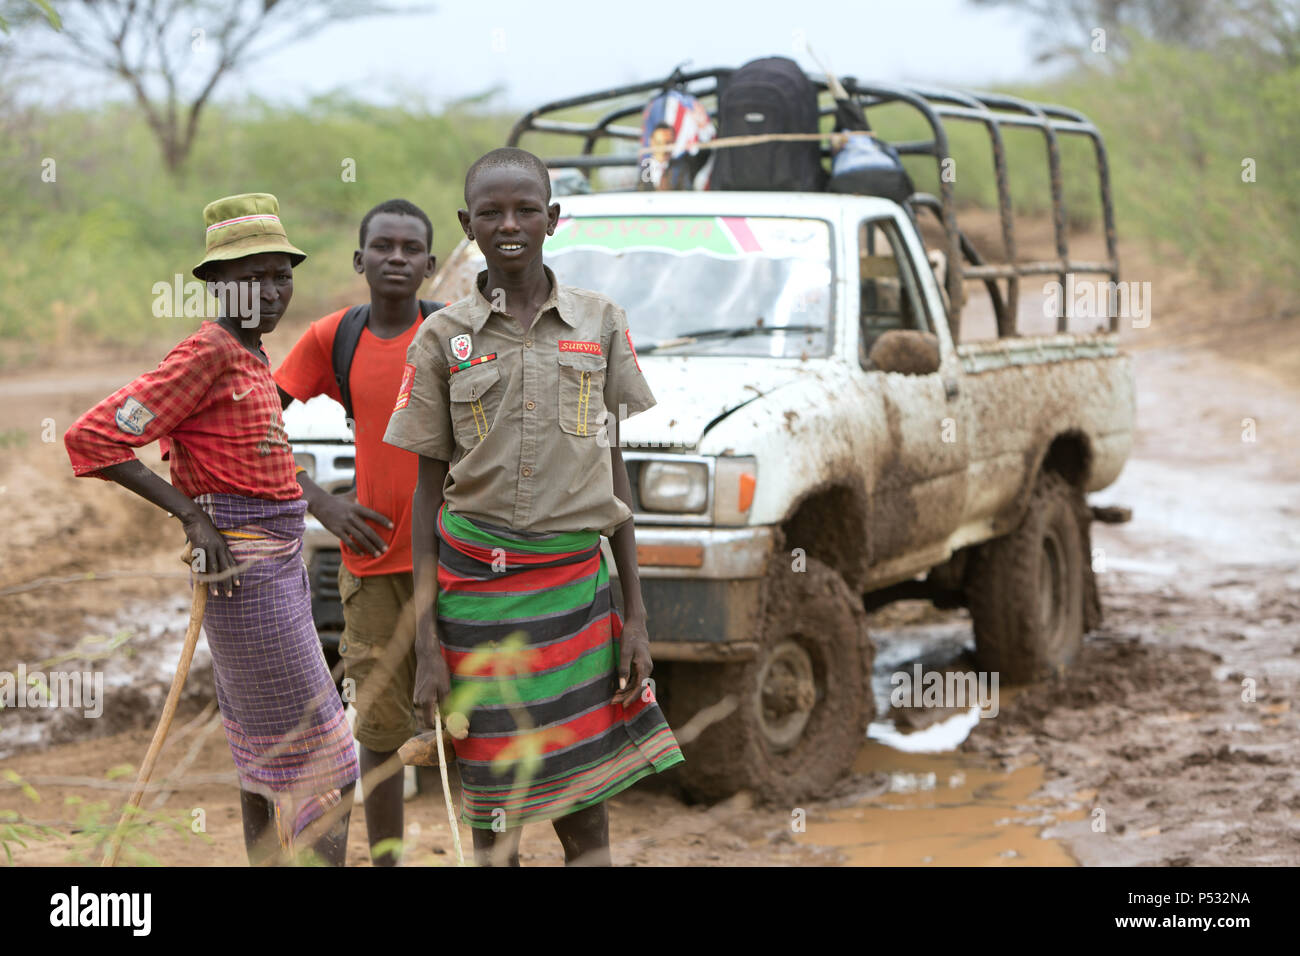 KAKUMA, KENYA - Three boys are standing in front of a pickup truck on a country road outside the Kakuma refugee camp. Stock Photo